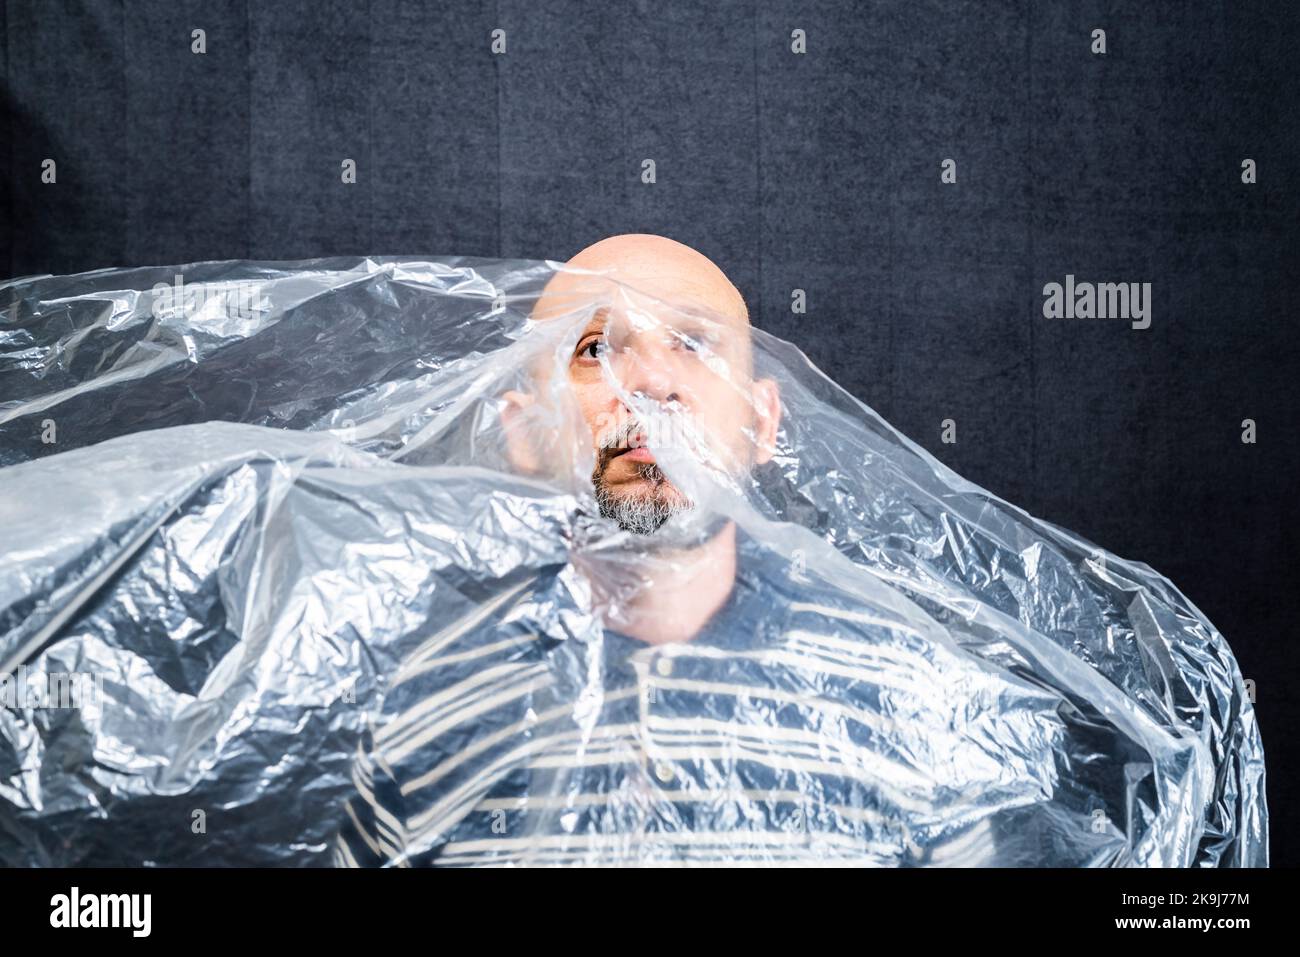 Mature man with a transparent plastic bag flying over his head and face. suffocate. face in a plastic bag, strangulation Stock Photo